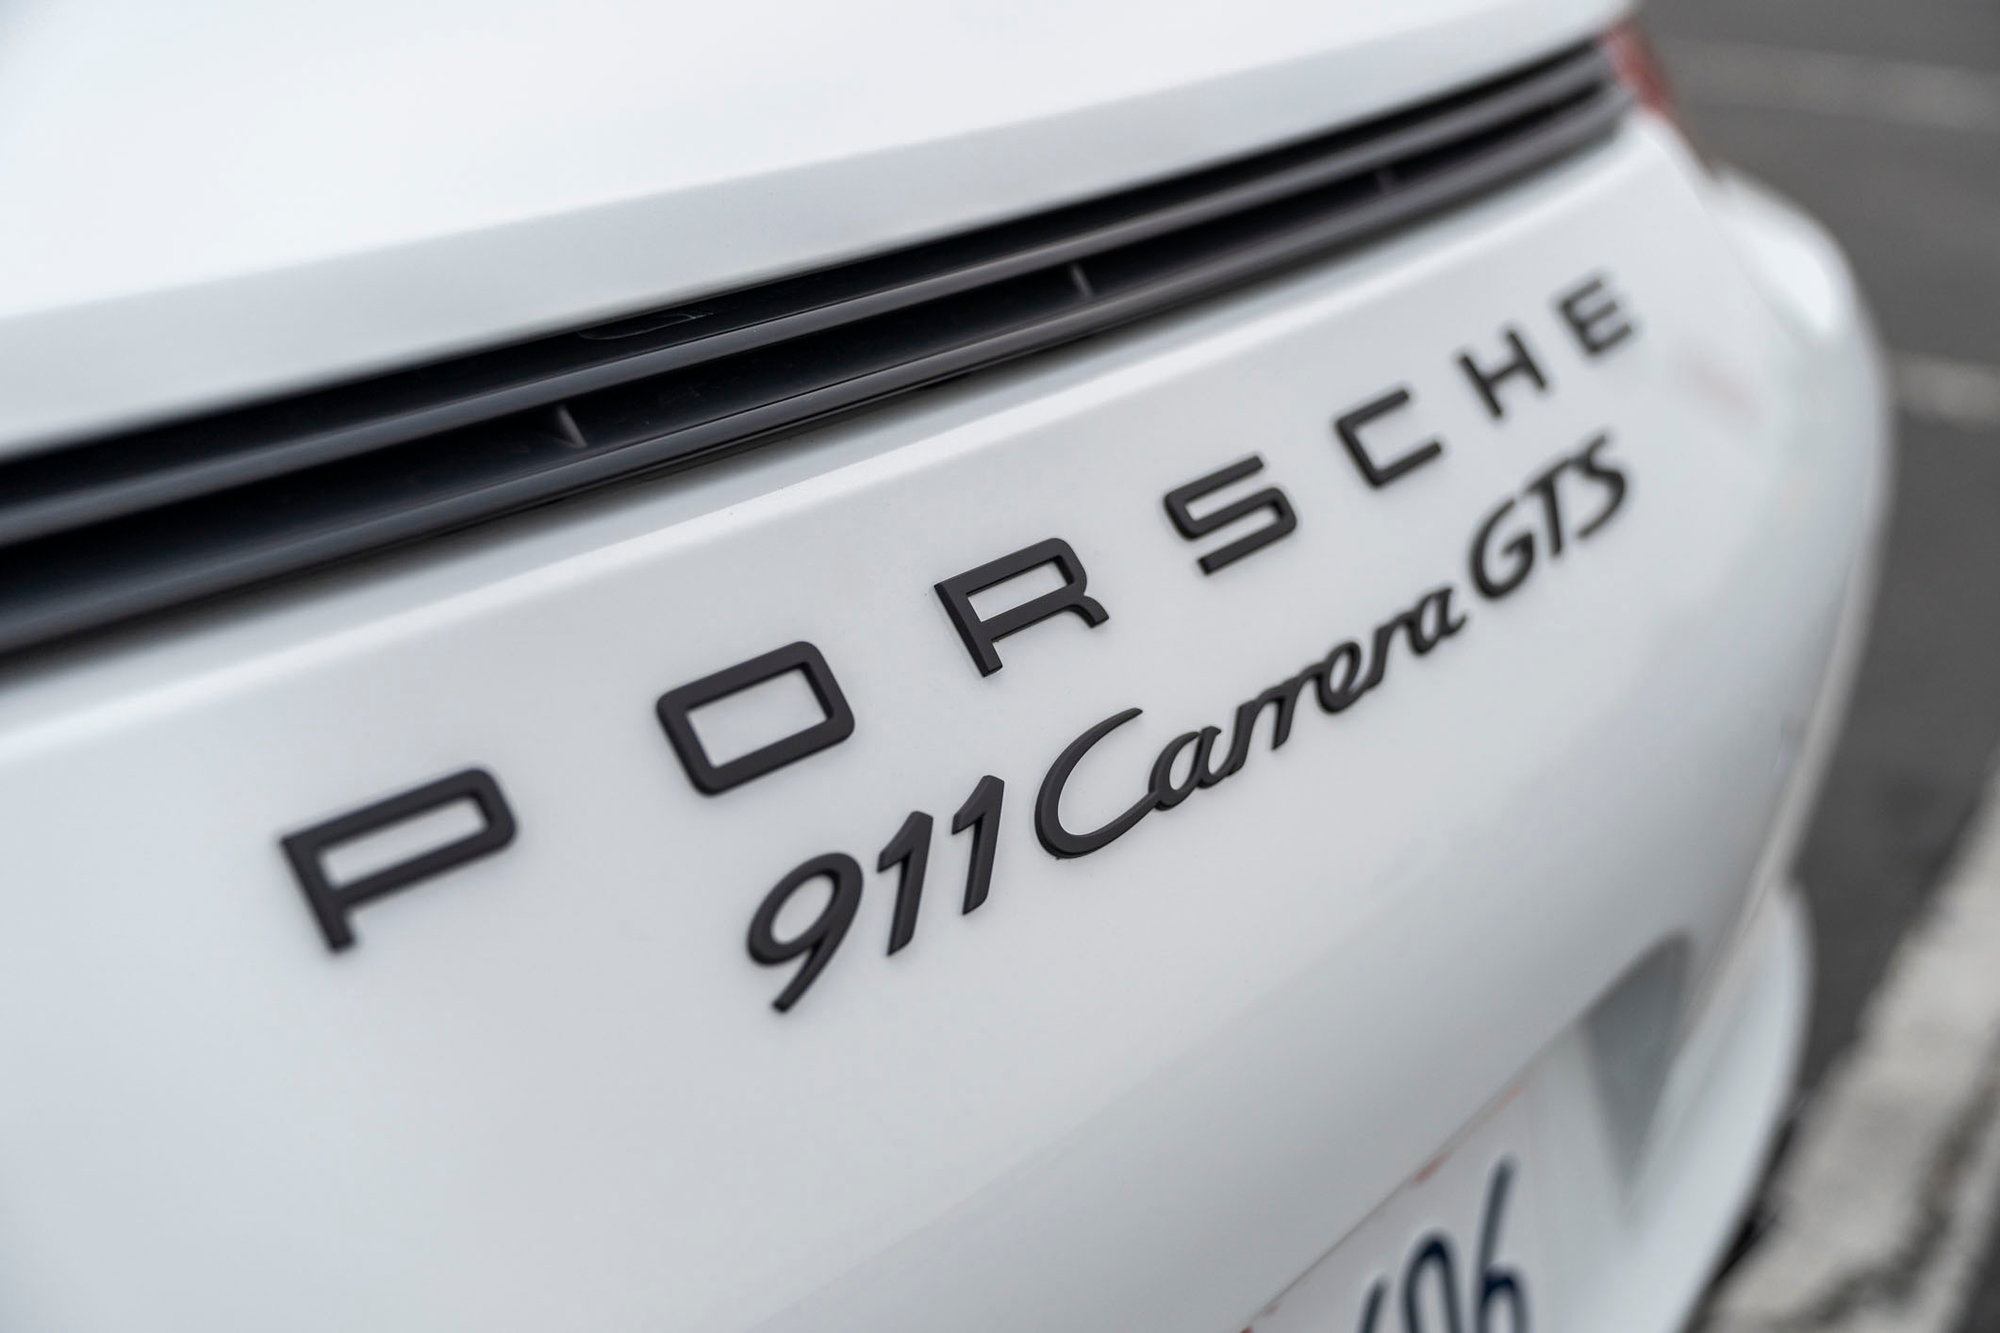 2015 Porsche 911 - 2015 911 GTS-25,084 miles, stunning car!!!  $115,000 OBO - Used - VIN WP0AB2A91FS124430 - 6 cyl - 2WD - Automatic - Coupe - White - San Jose, CA 95124, United States